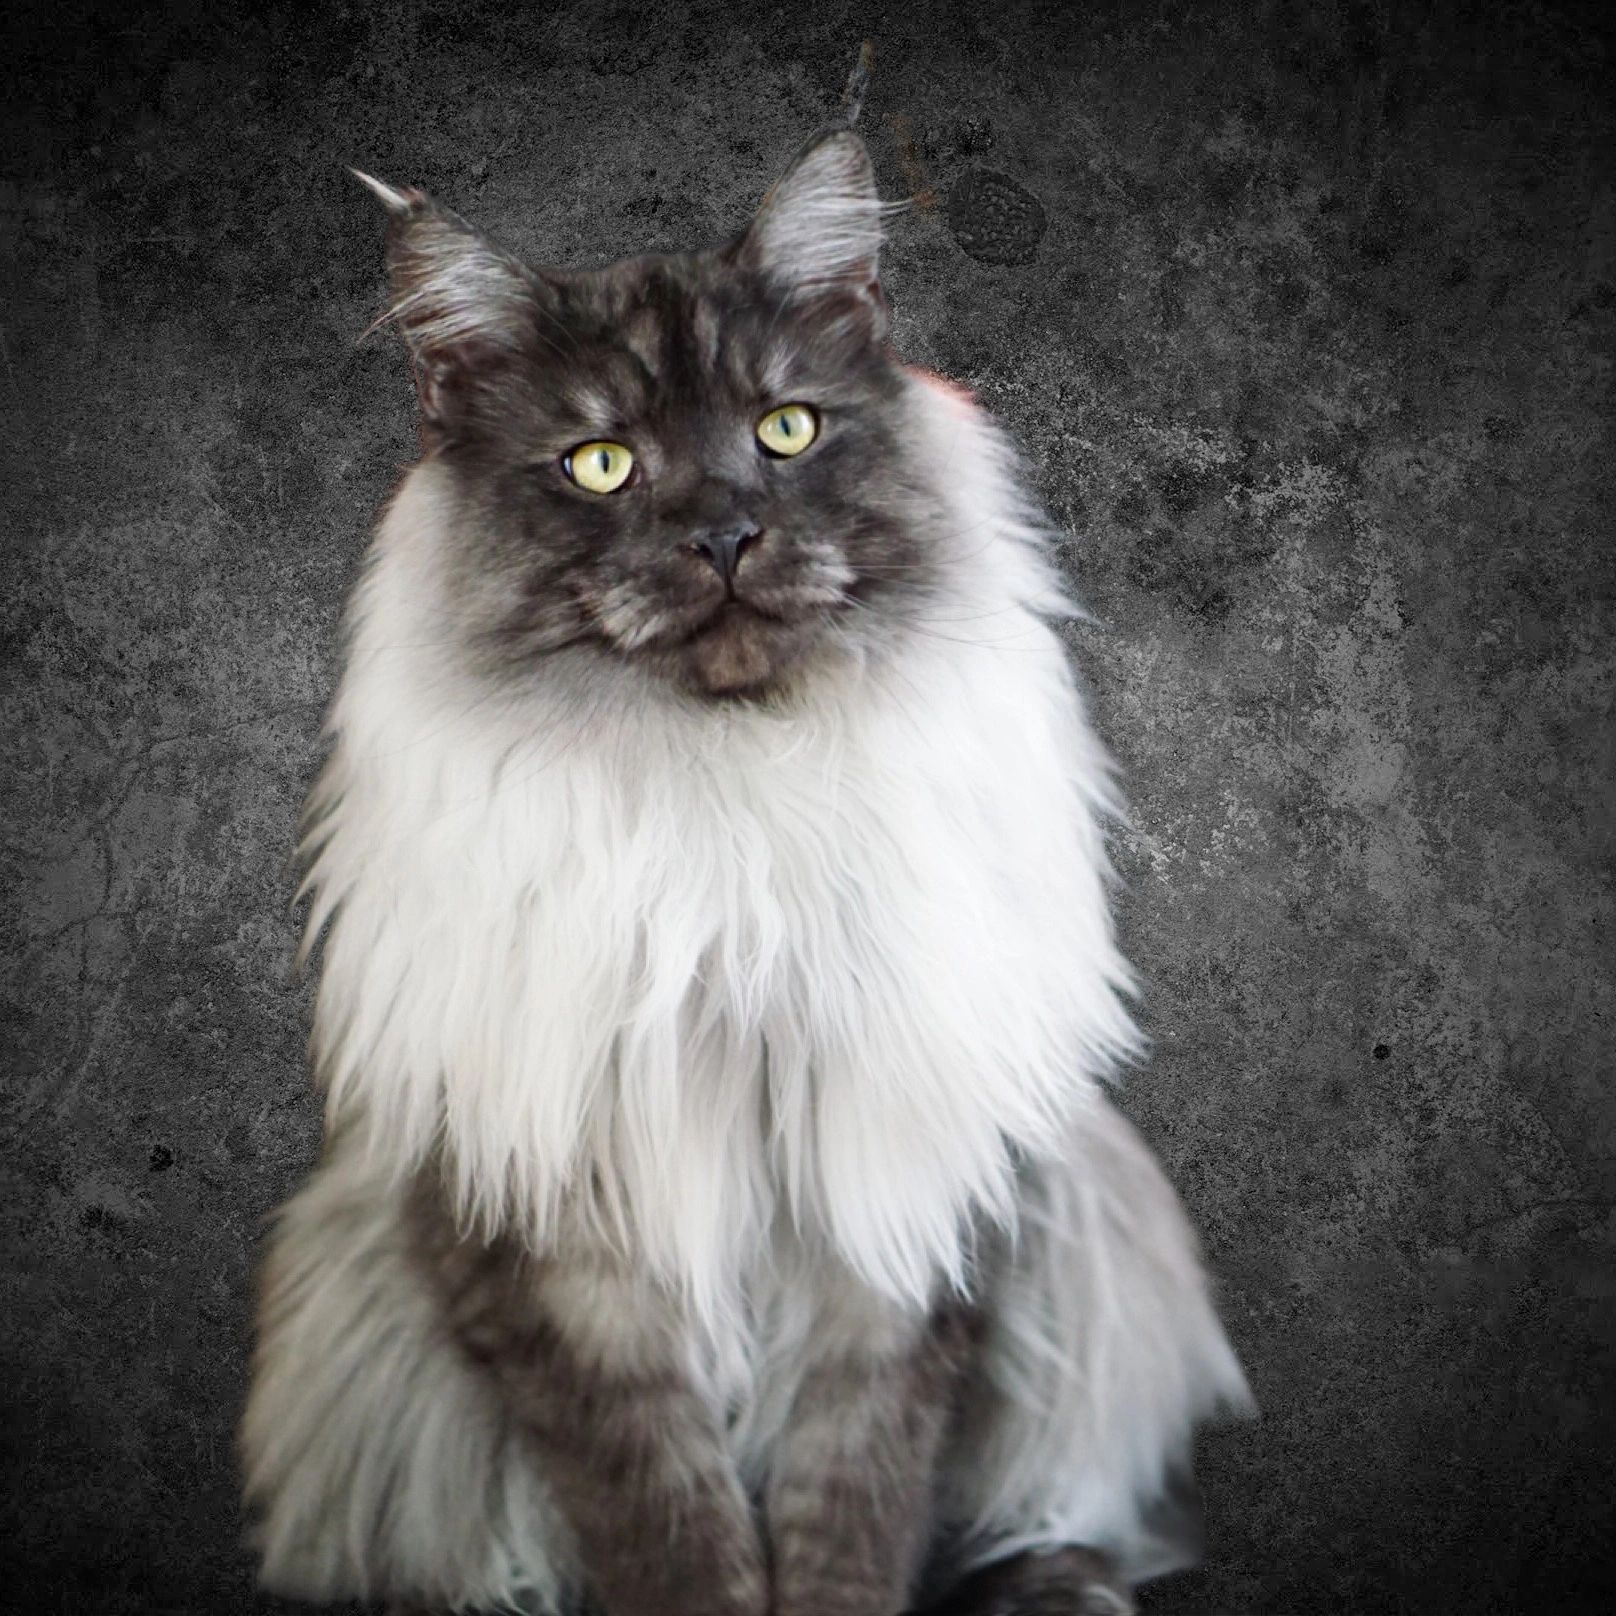 MAINE COON CATS FOR SALE FROM ATTY KATS TAMPA Maine Coon Kittens, European Maine Coon